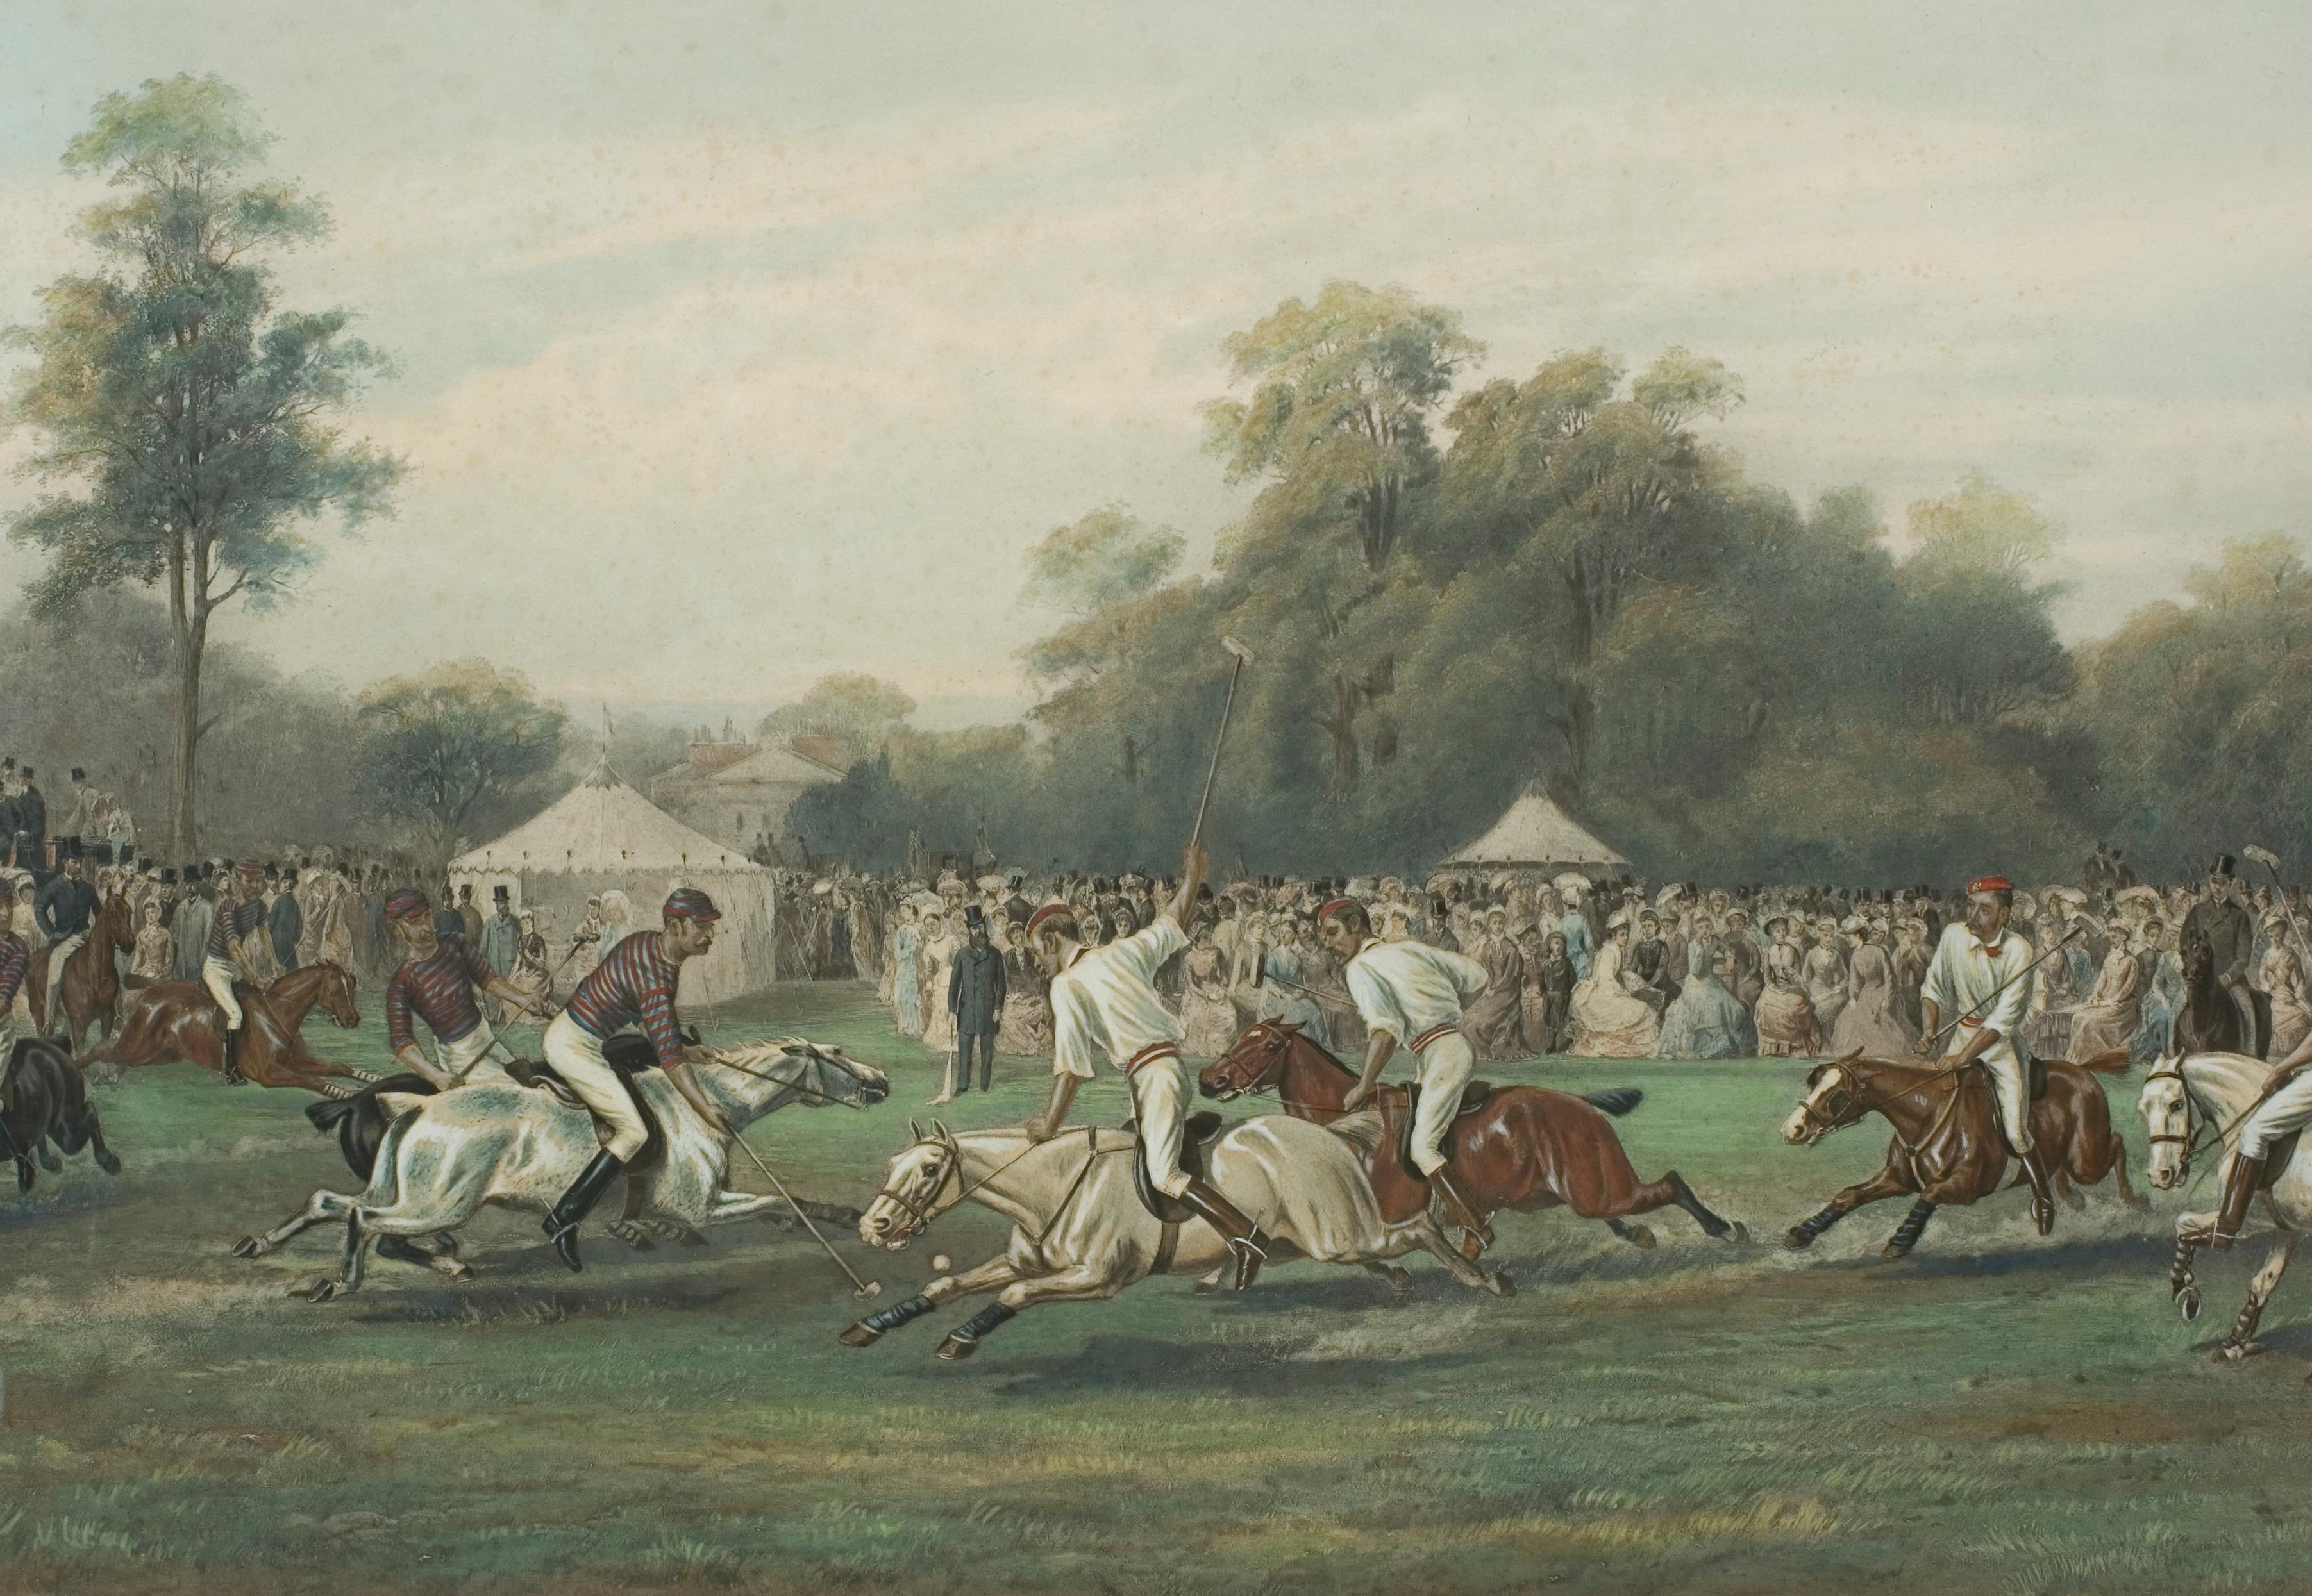 Paper Antique Polo Print, Match at Hurlingham Between the Horse Guards 'Blues'..